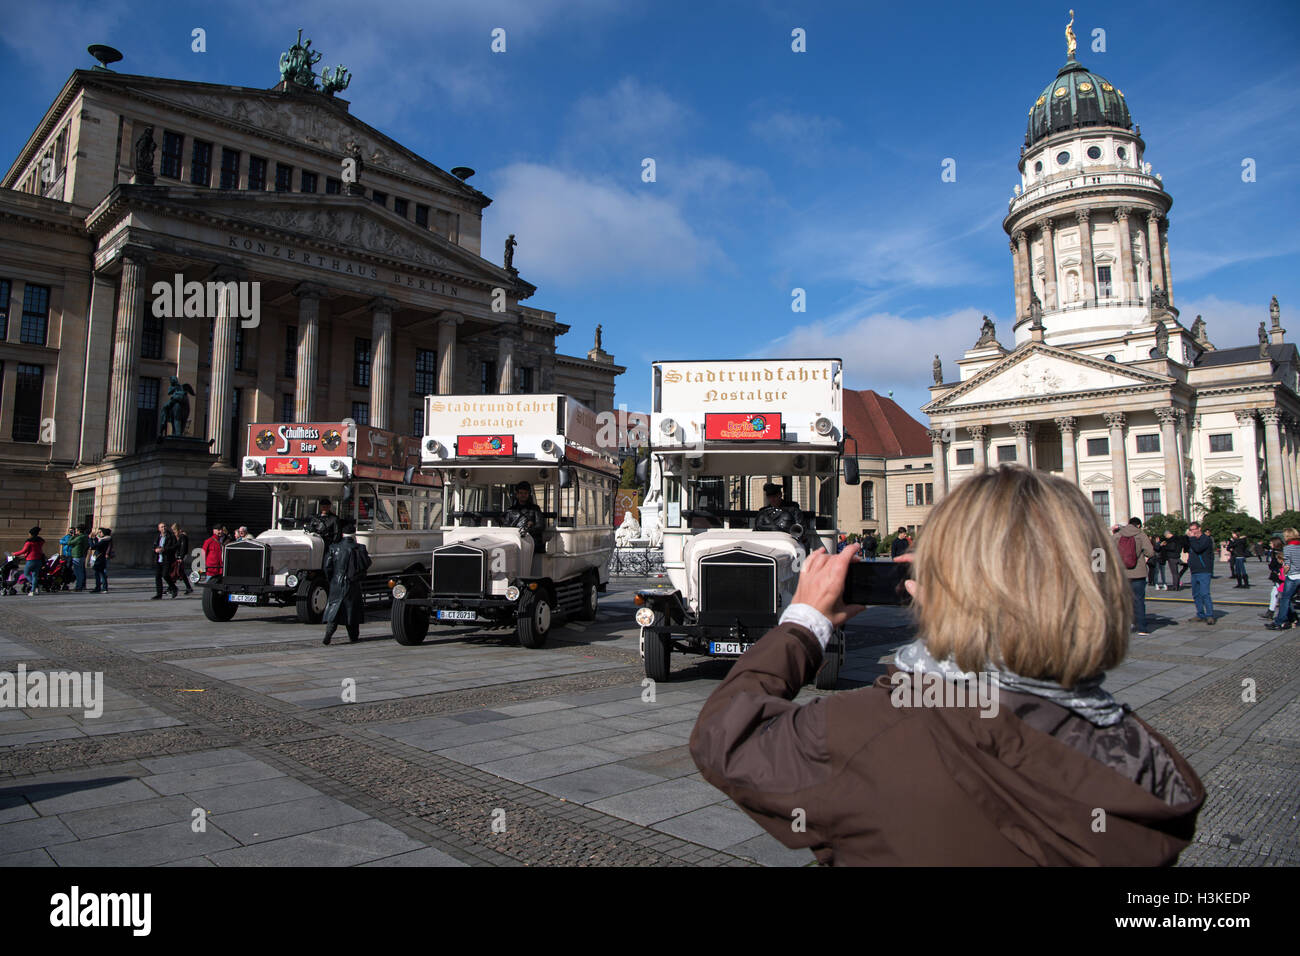 Berlin, Germany. 10th Oct, 2016. Three replicas of the historic 'Zille' bus in central Berlin, Germany, 10 October 2016. The double decker buses, named after the painter Heinrich Zille, were part of the Berlin cityscape between 1916 and 1927. Built by the Berlin Public Transport Company (BVG) between 1976 and 1987, the three replica buses are today utilised for historical city tours by the tourism company BCT Berlin City Tour. Photo: Bernd von Jutrczenka/dpa Stock Photo